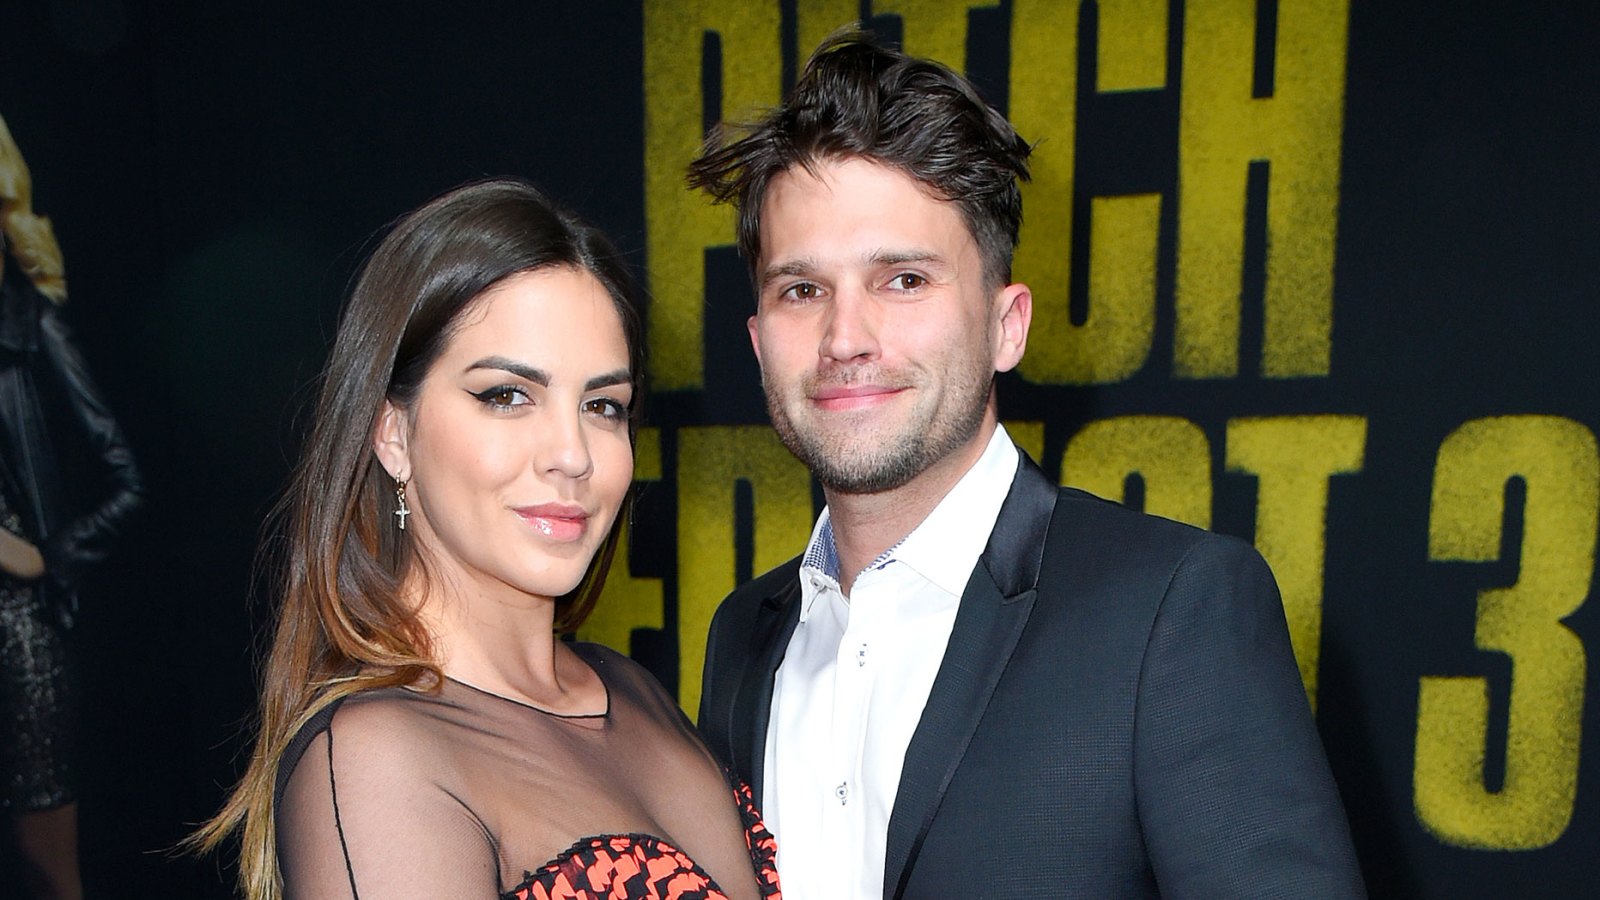 Katie Maloney Confirms She Isnt Pregnant After Tom Schwartz Make It Three Post